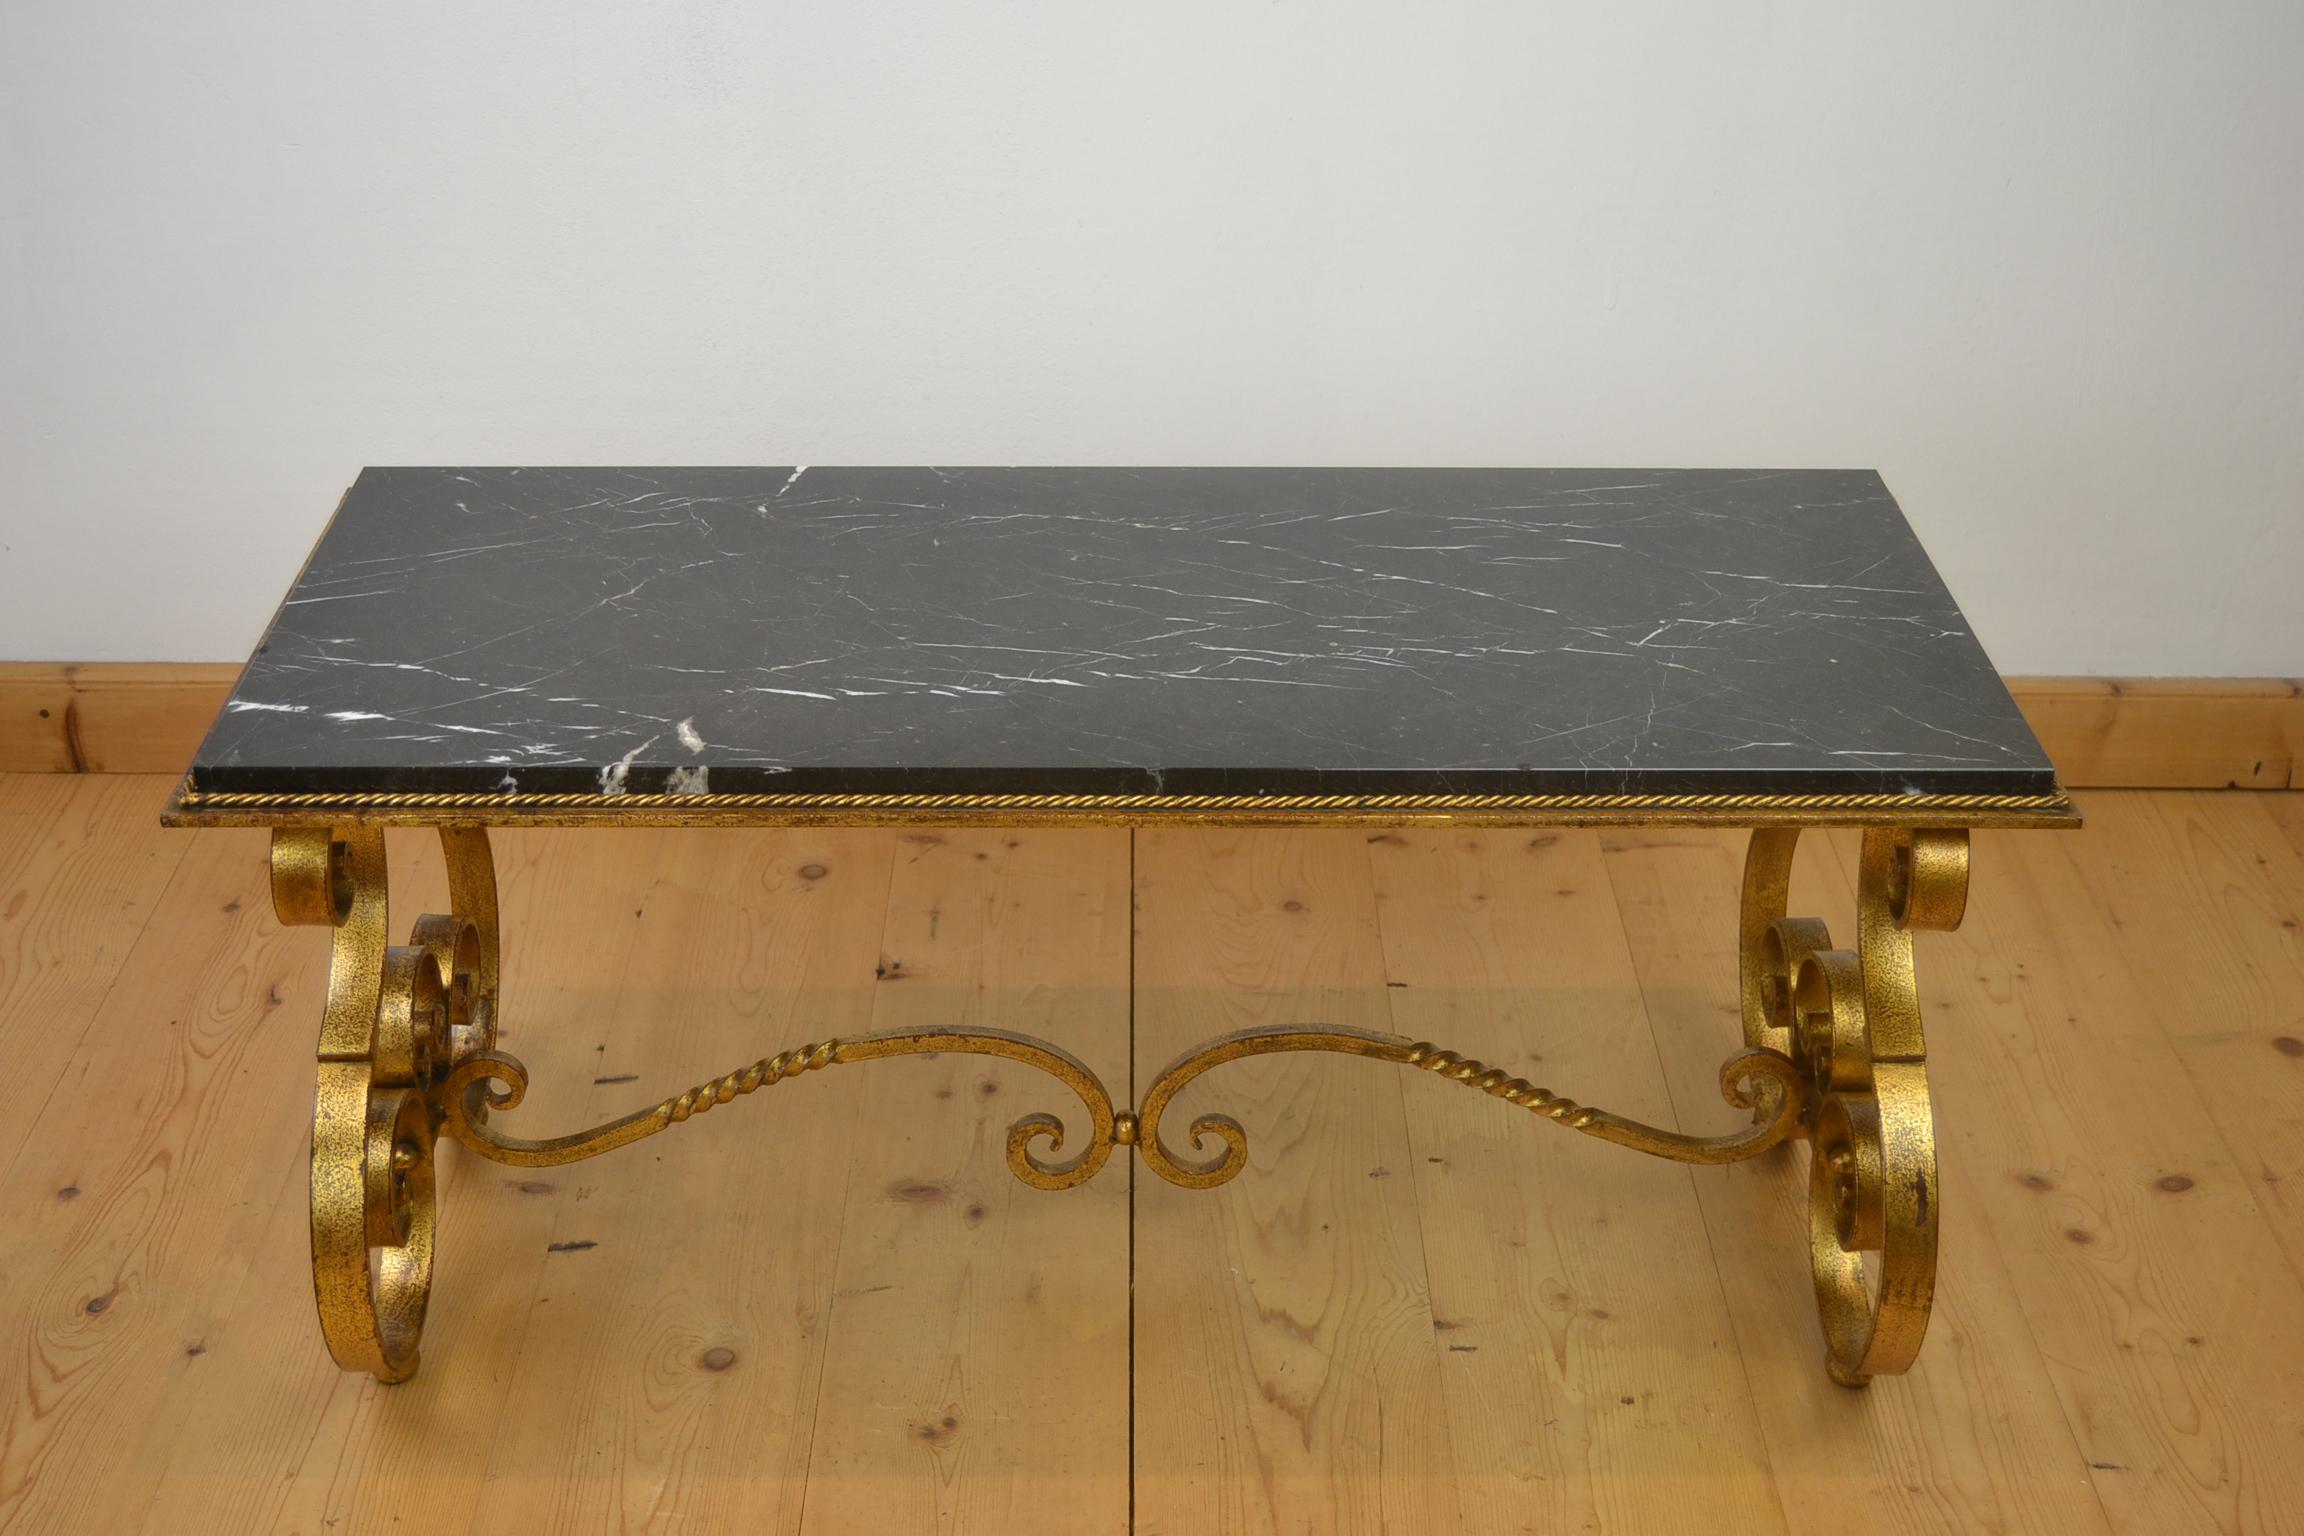 French coffee table of wrought iron with a marble top from the 1950s.
This great coffee table has a curled gilded wrought iron base with a polished black vained marble top or tray. Around the marble top you have a metal twisted cord.
A French coffee